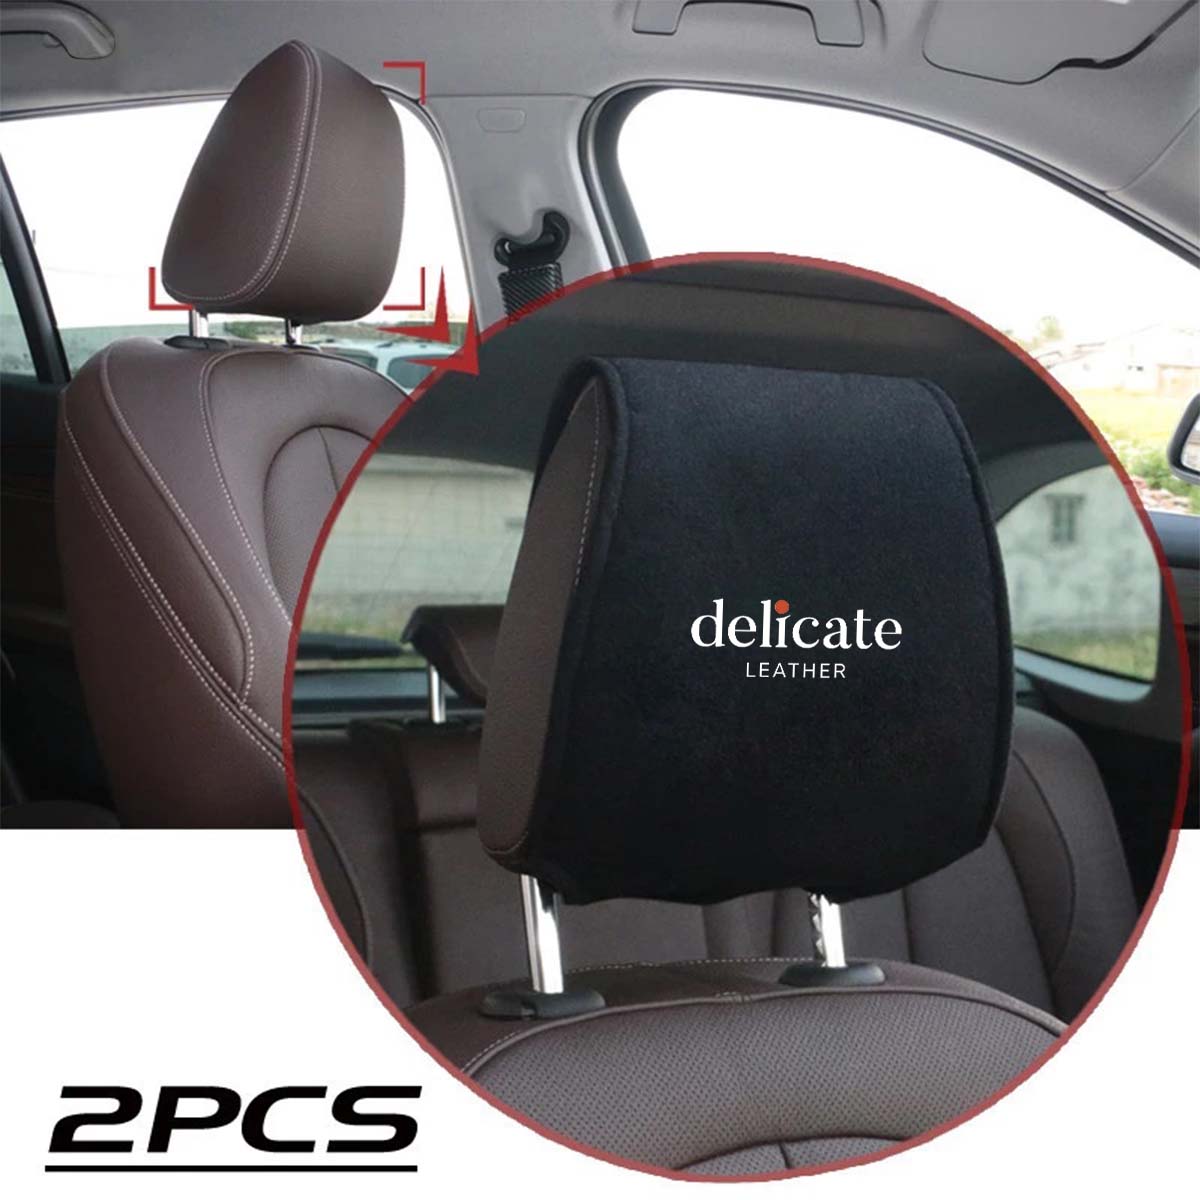 Car Seat Headrest Cover Breathable Flexible Headrest Covers Velcro Auto Headrest Covers Universal Fit, Custom For Your Cars, Car Accessories AR13998